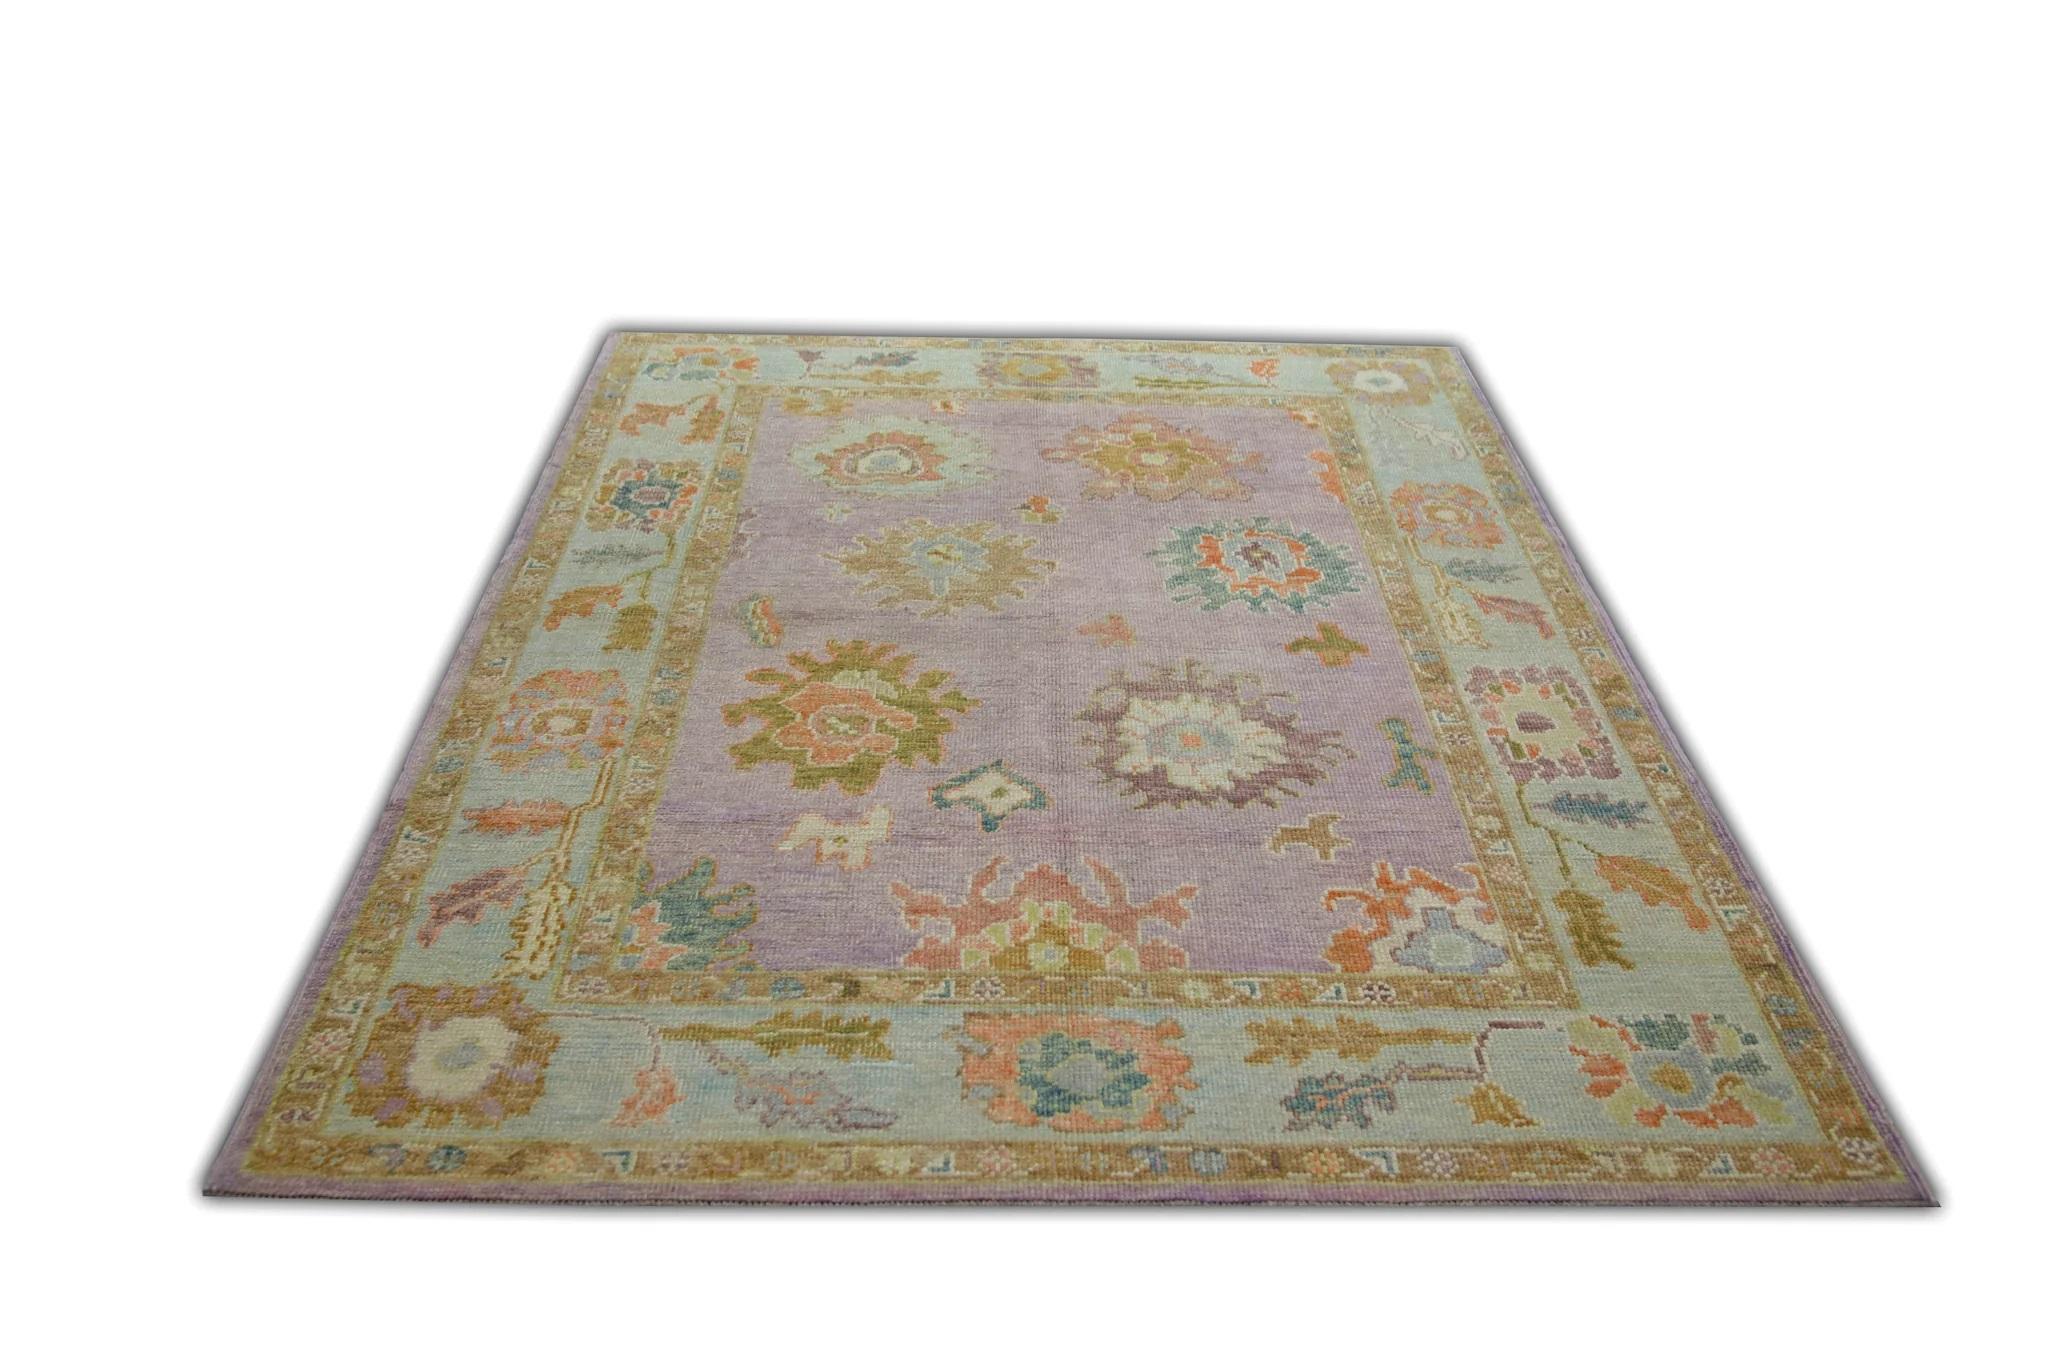 Contemporary Soft Purple Handwoven Wool Turkish Oushak Rug w/ Colorful Floral Design 5'1x6'8 For Sale